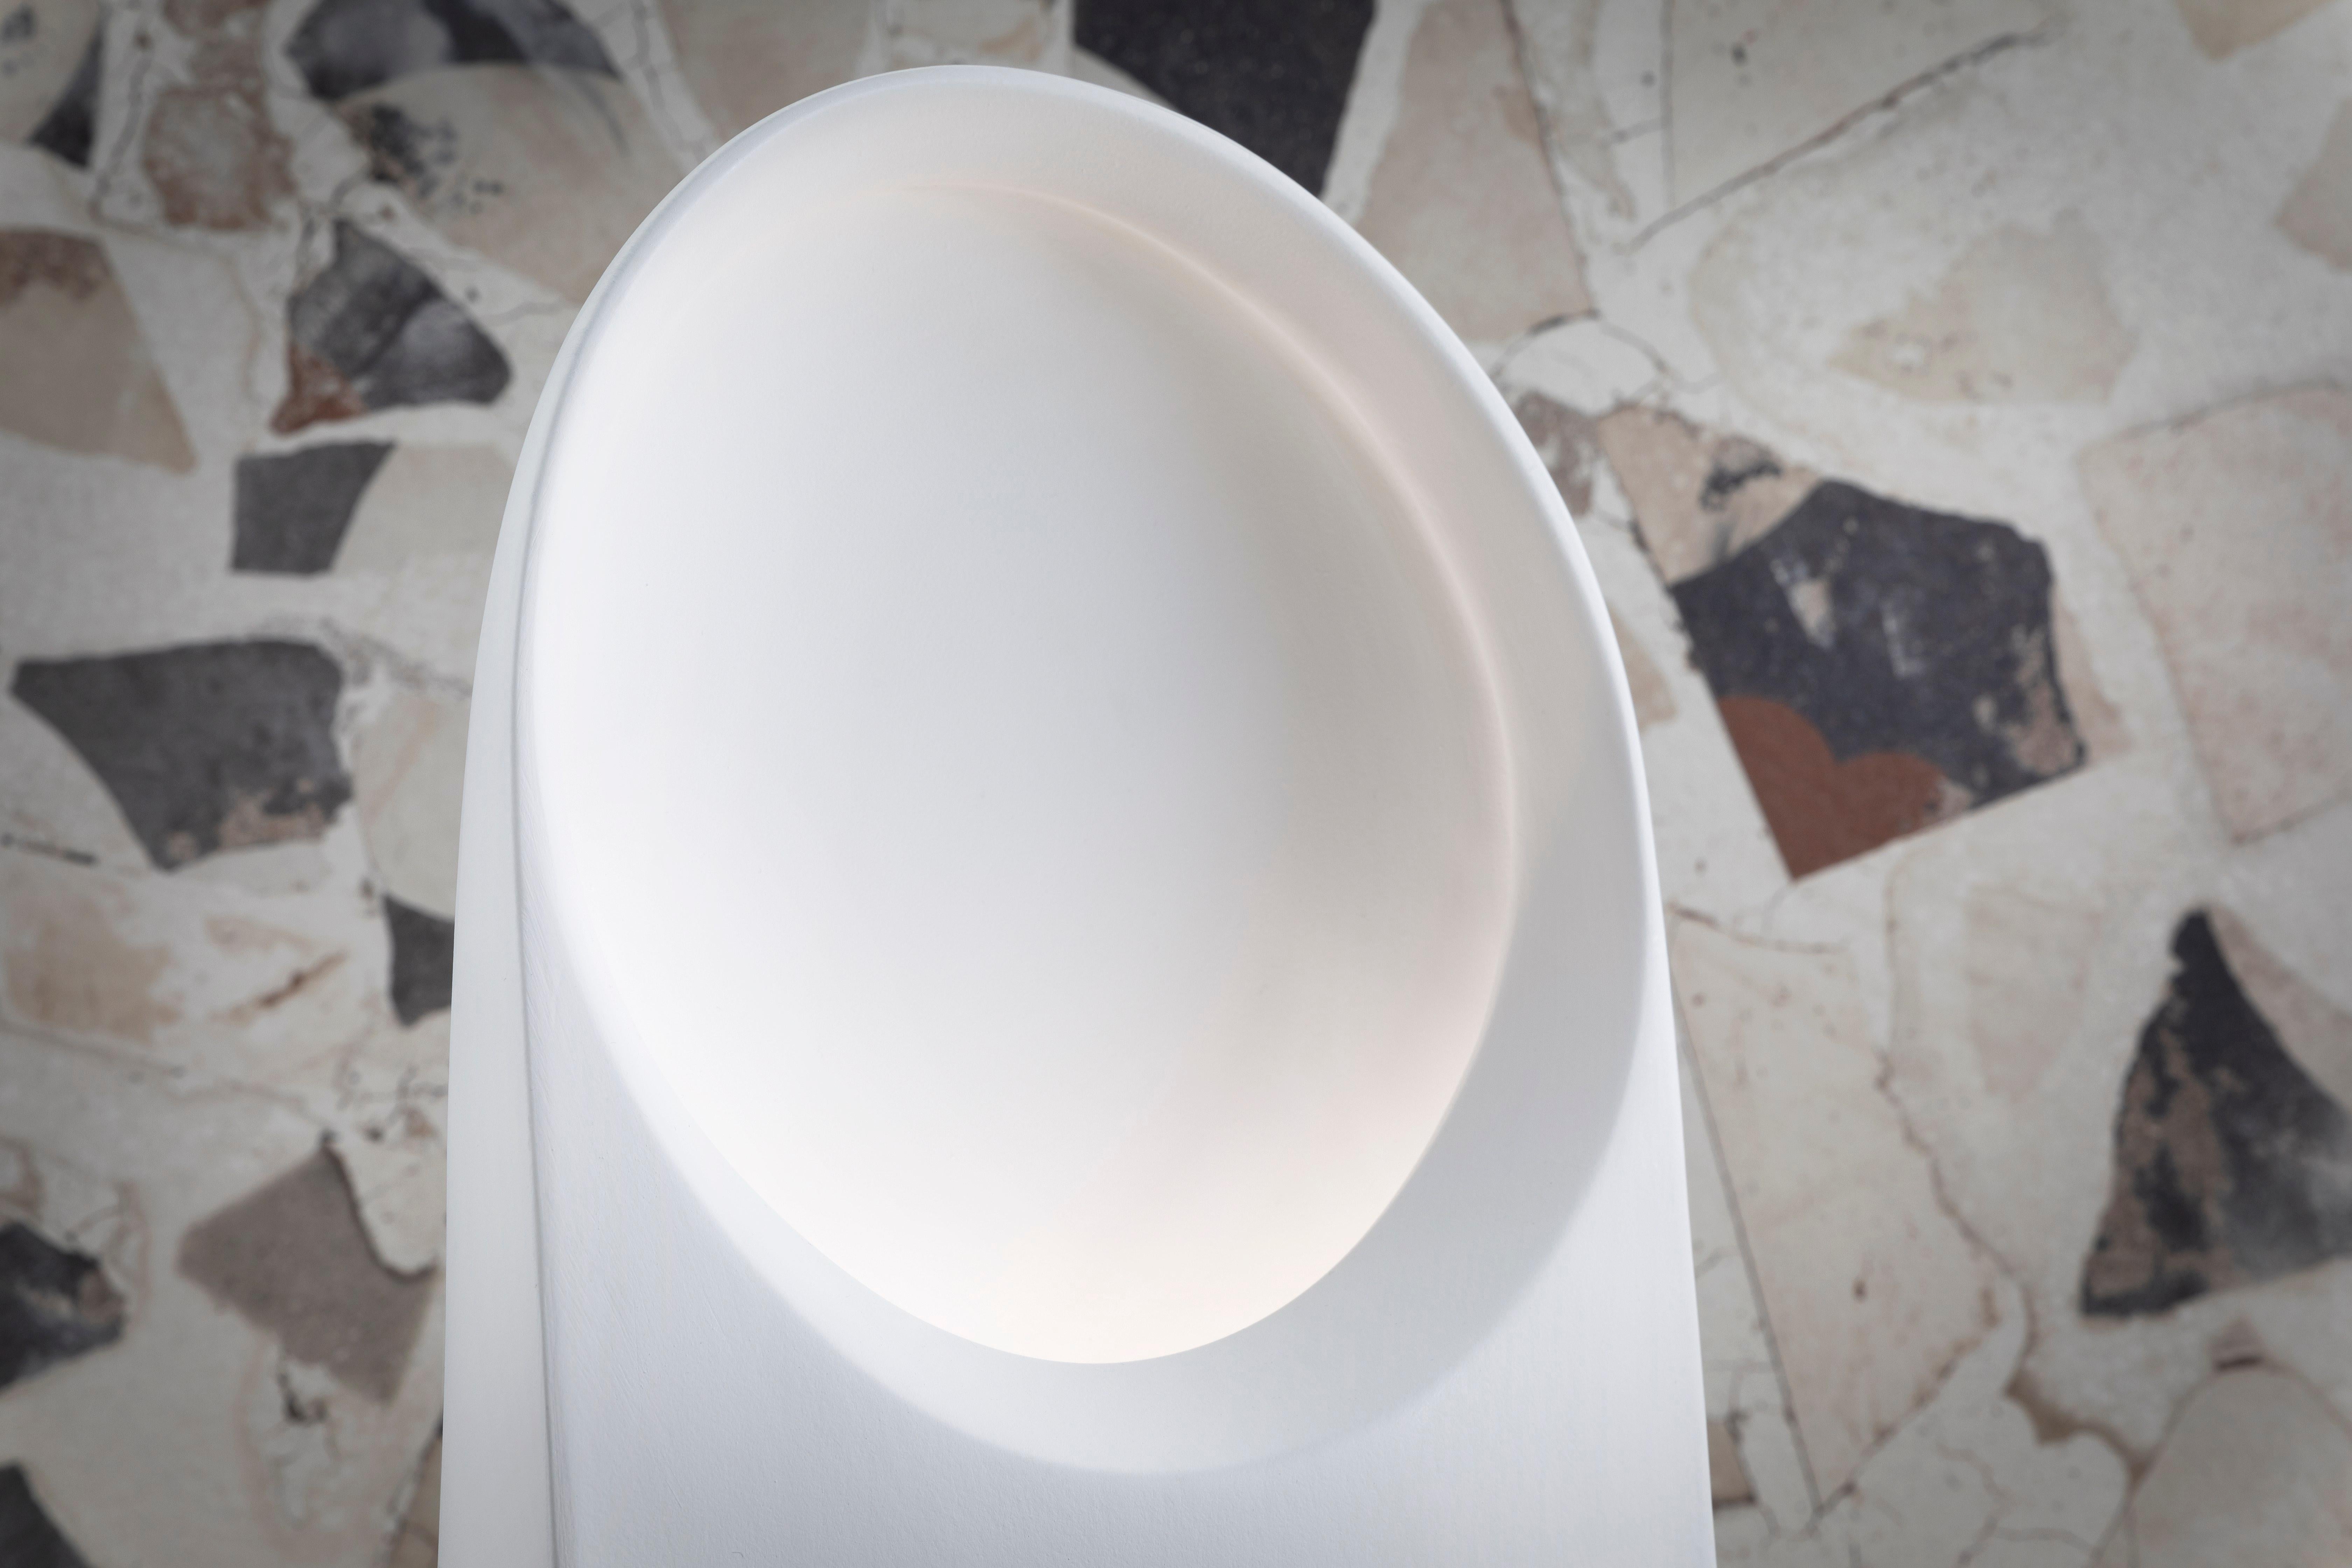 With Frank, we continue the game between light and ceramic, removing every excess from the form. It is the eye which diffuses the light, caressing the underlying body with a rich nuance.

Additional Information:
Material: Ceramic
Finish: White